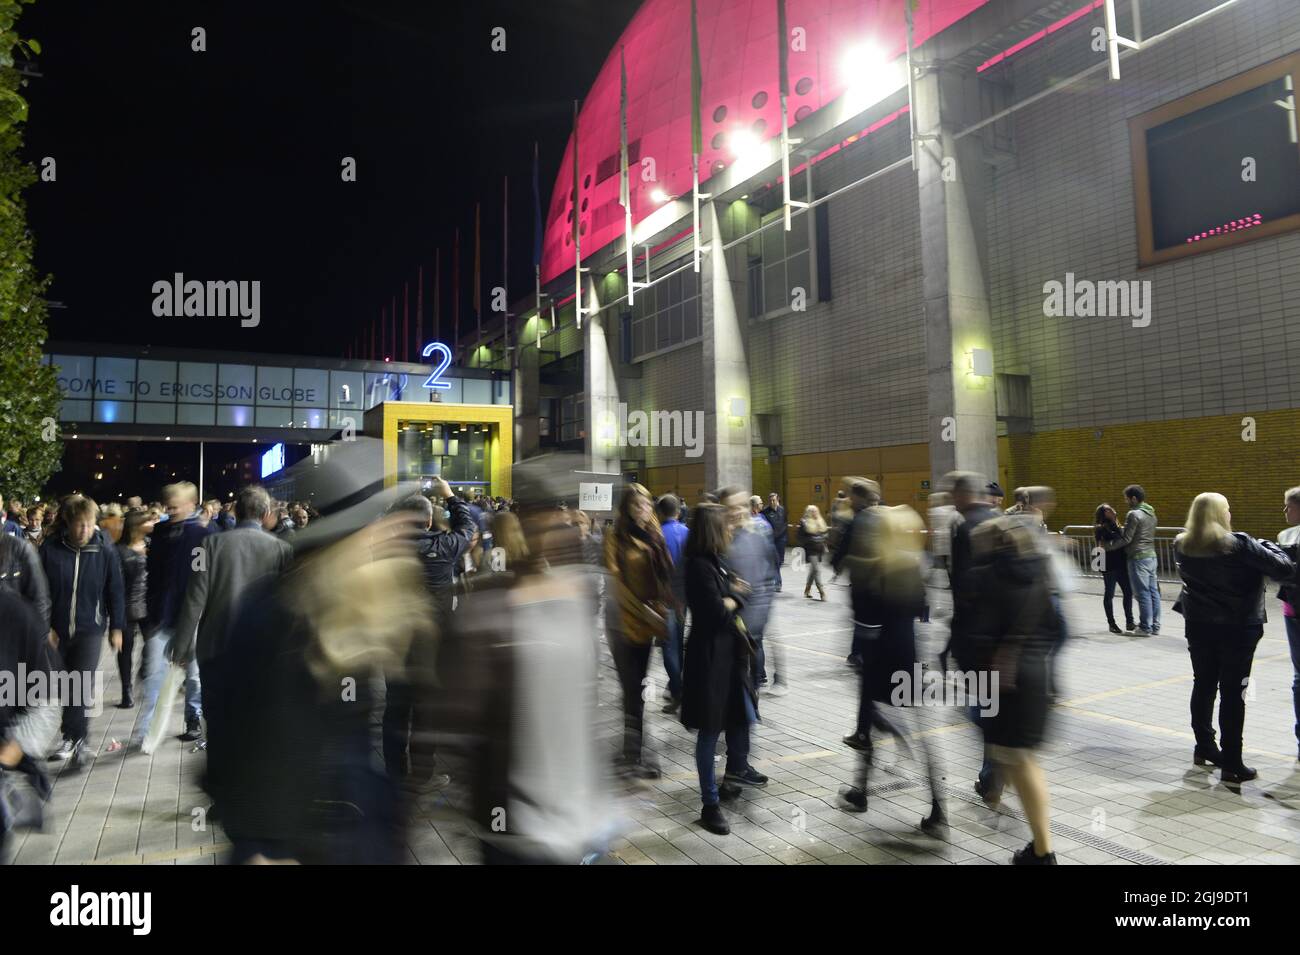 STOCKHOLM 2015-09-20 U2 concertgoers leave the Ericsson Globe Arena in Stockholm, Sweden, September 20, 2015. After a two hour long delay, an evacuation of the arena and extra security checks Sundays U2 concert was finally cancelled. The concert will be held Tuesday. Photo: Pontus Lundahl / TT / Code 10050 ** SWEDEN OUT ** Stock Photo